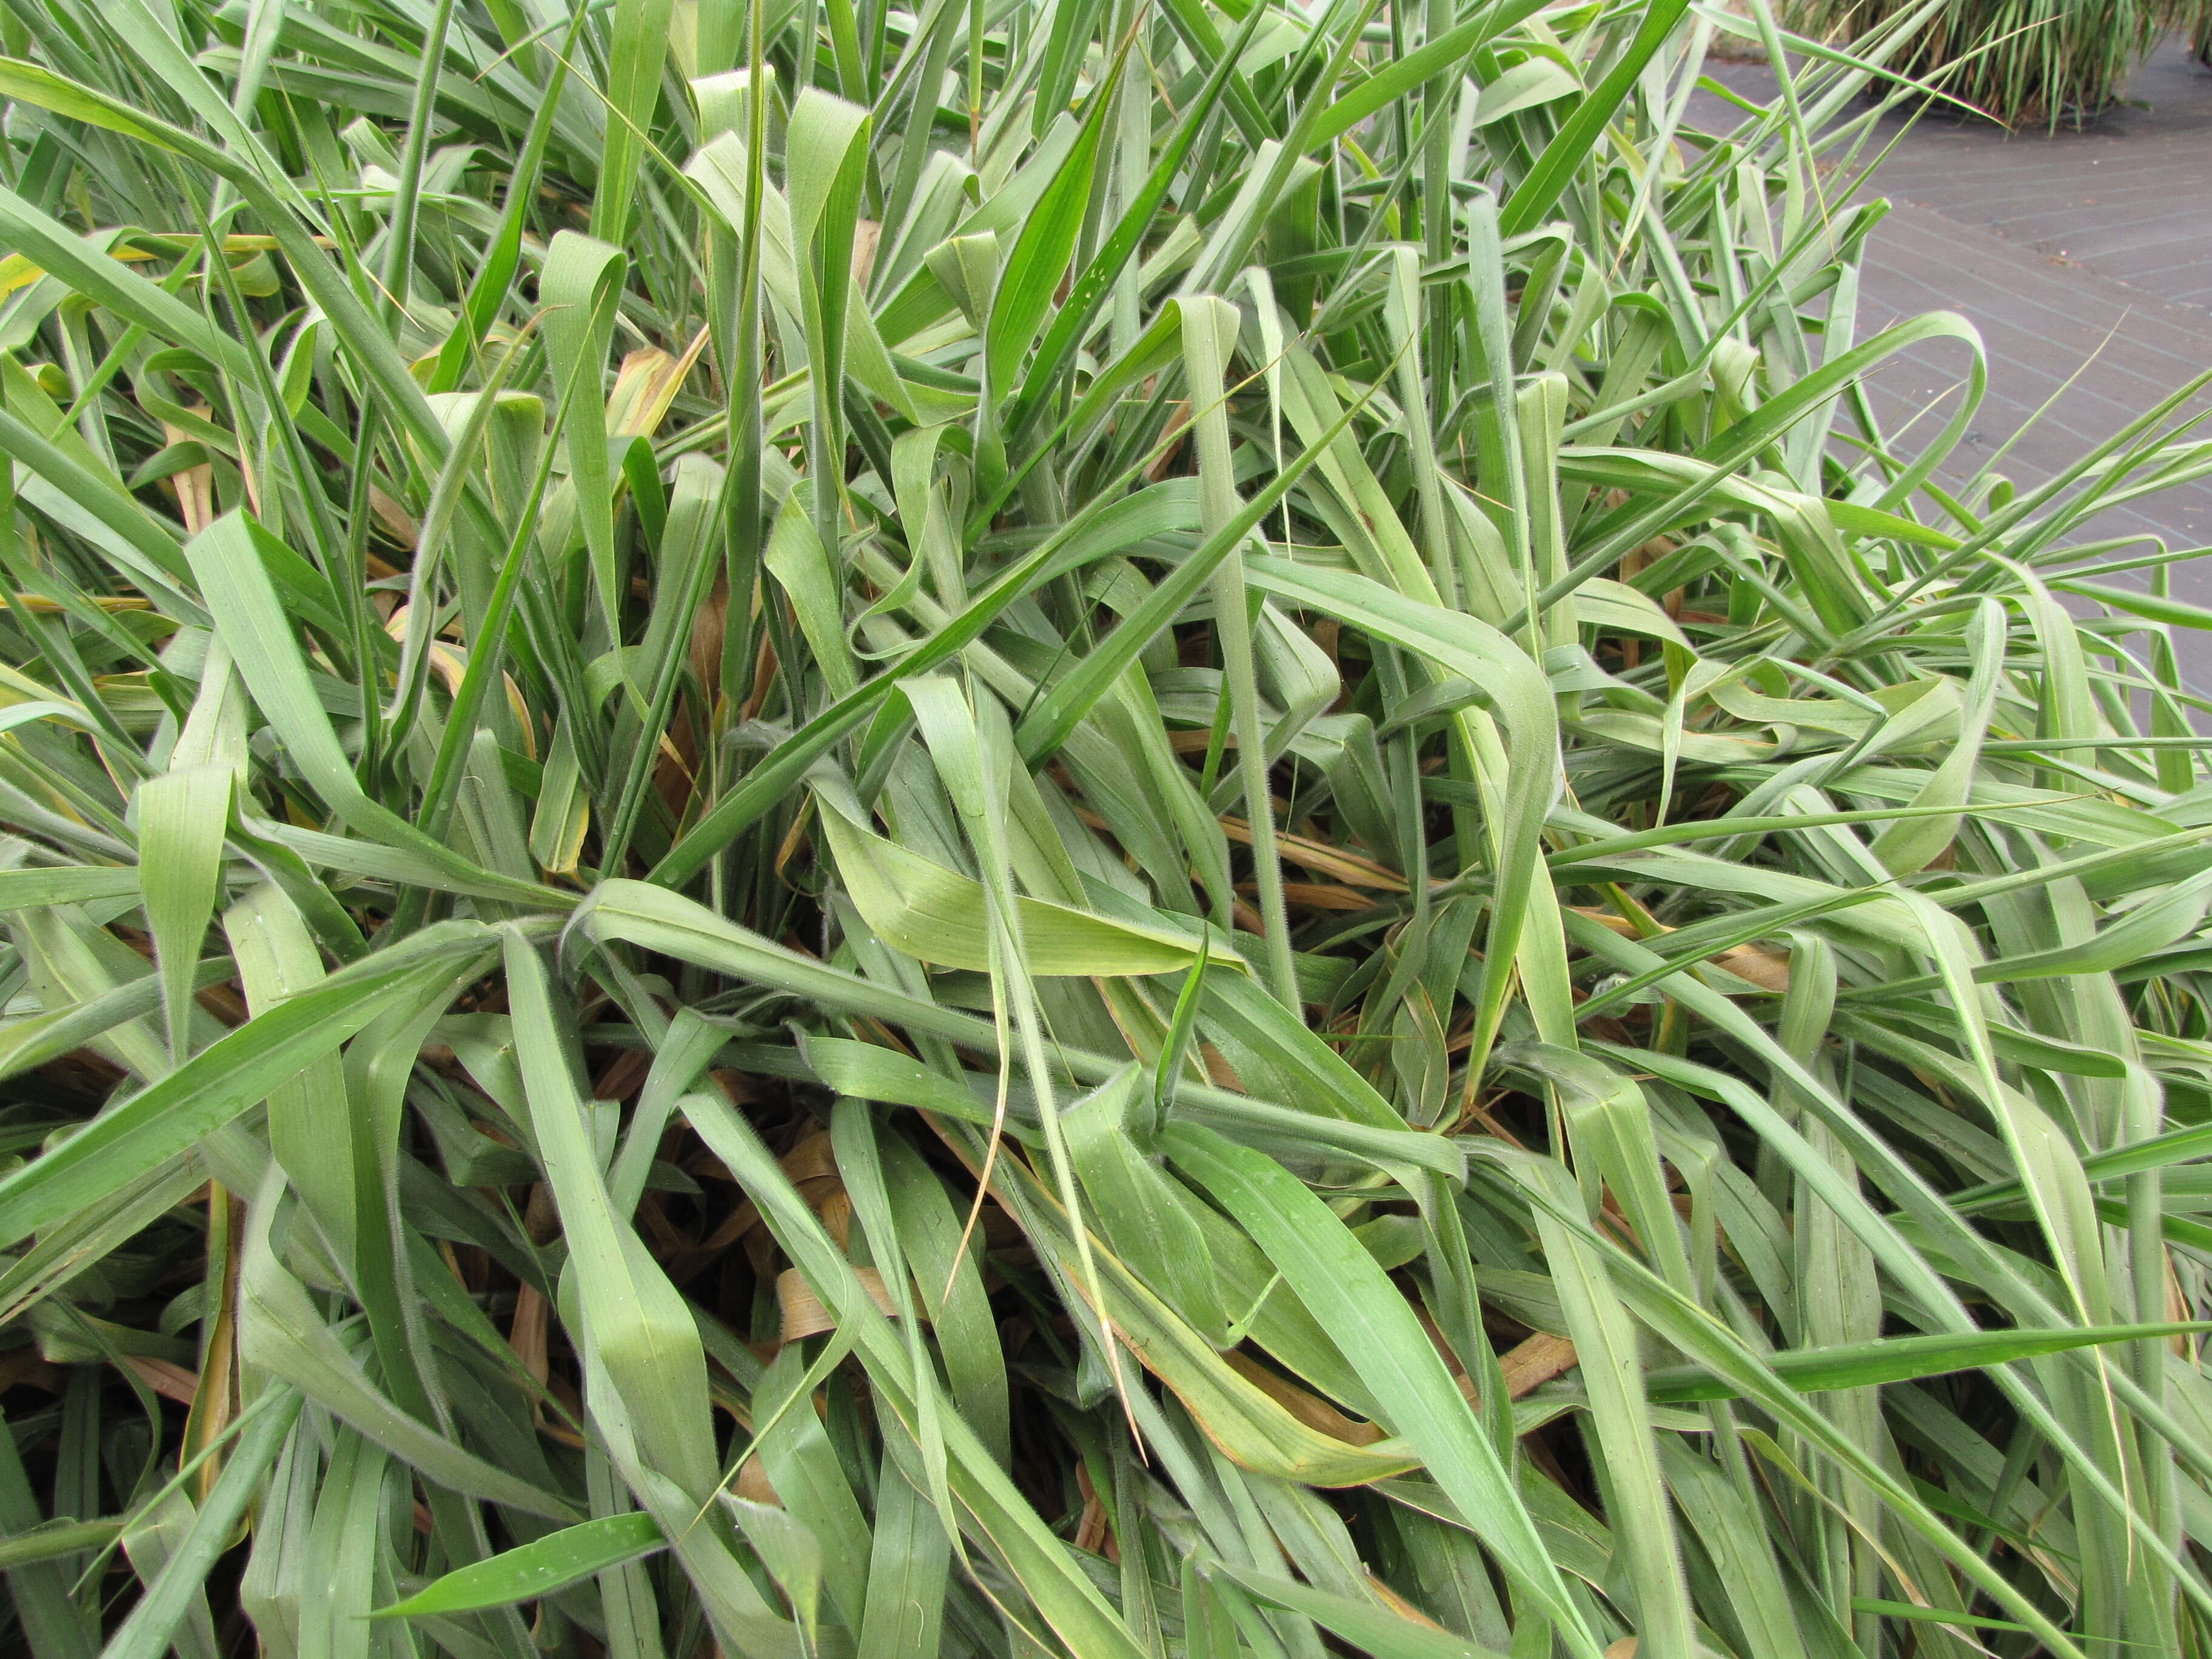 Image of Common signal grass